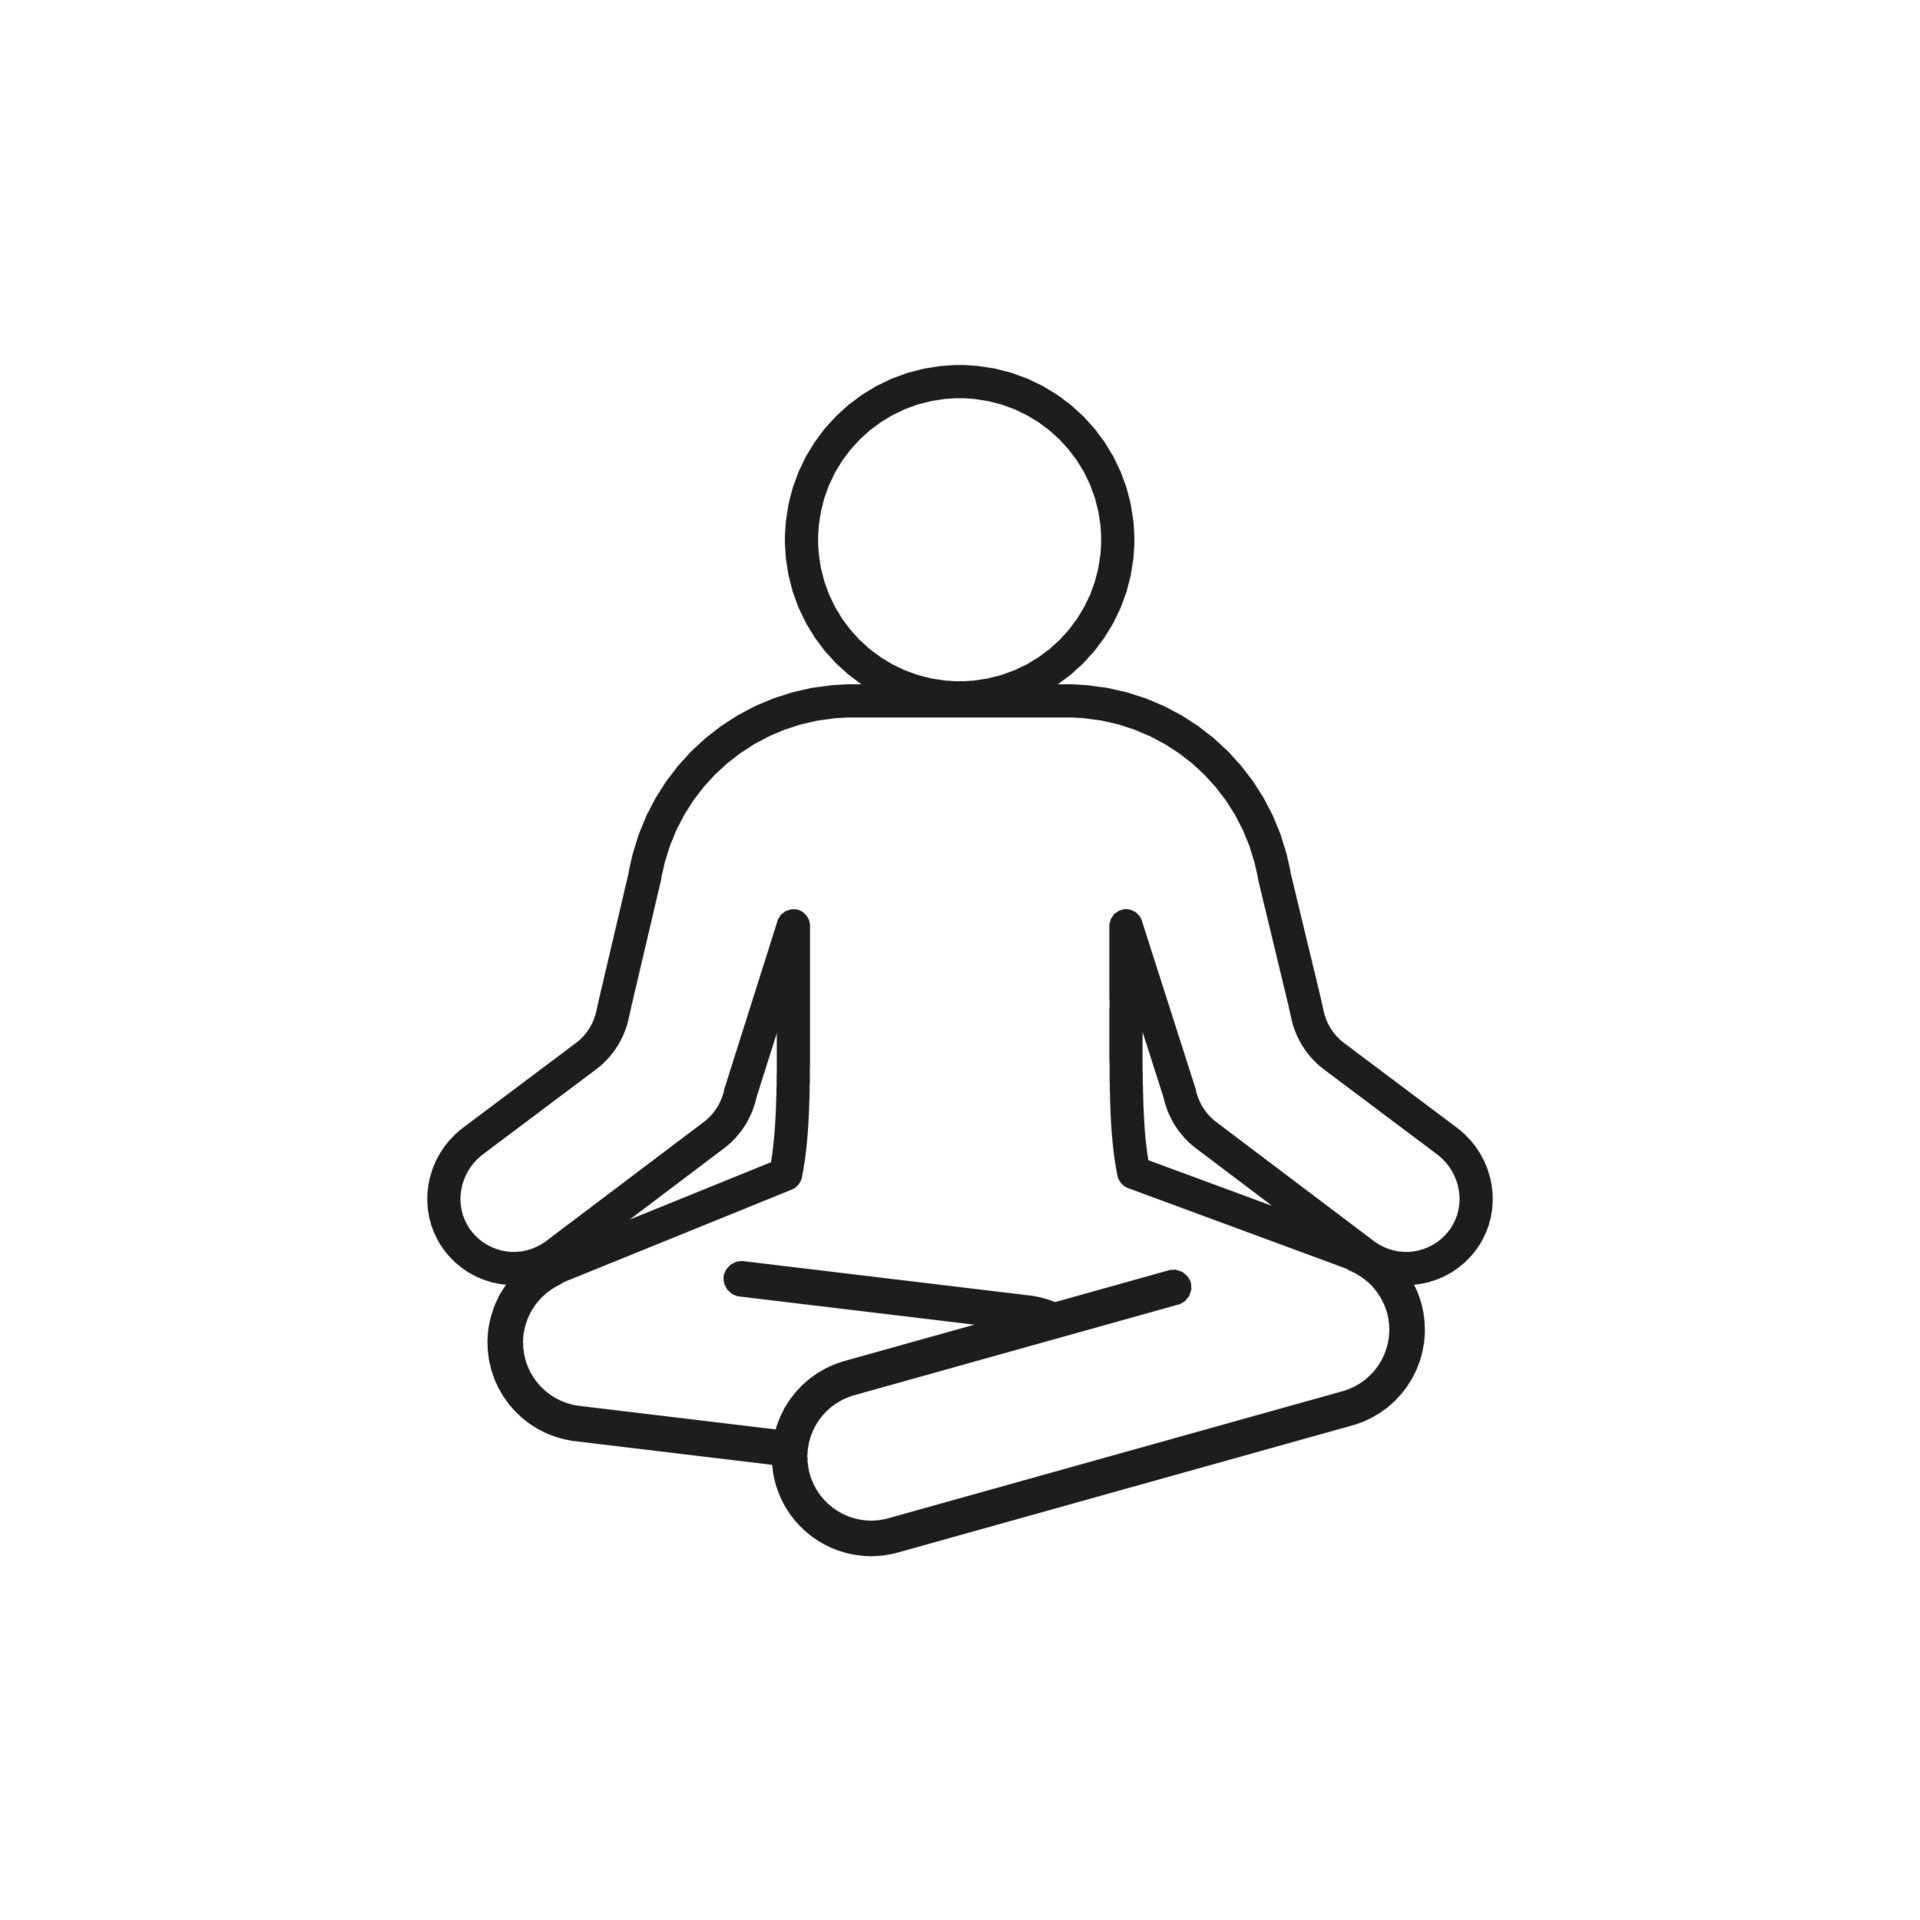 vecteezy_meditate-yoga-person-sitting-in-lotus-position-line-icon_6408741.jpg